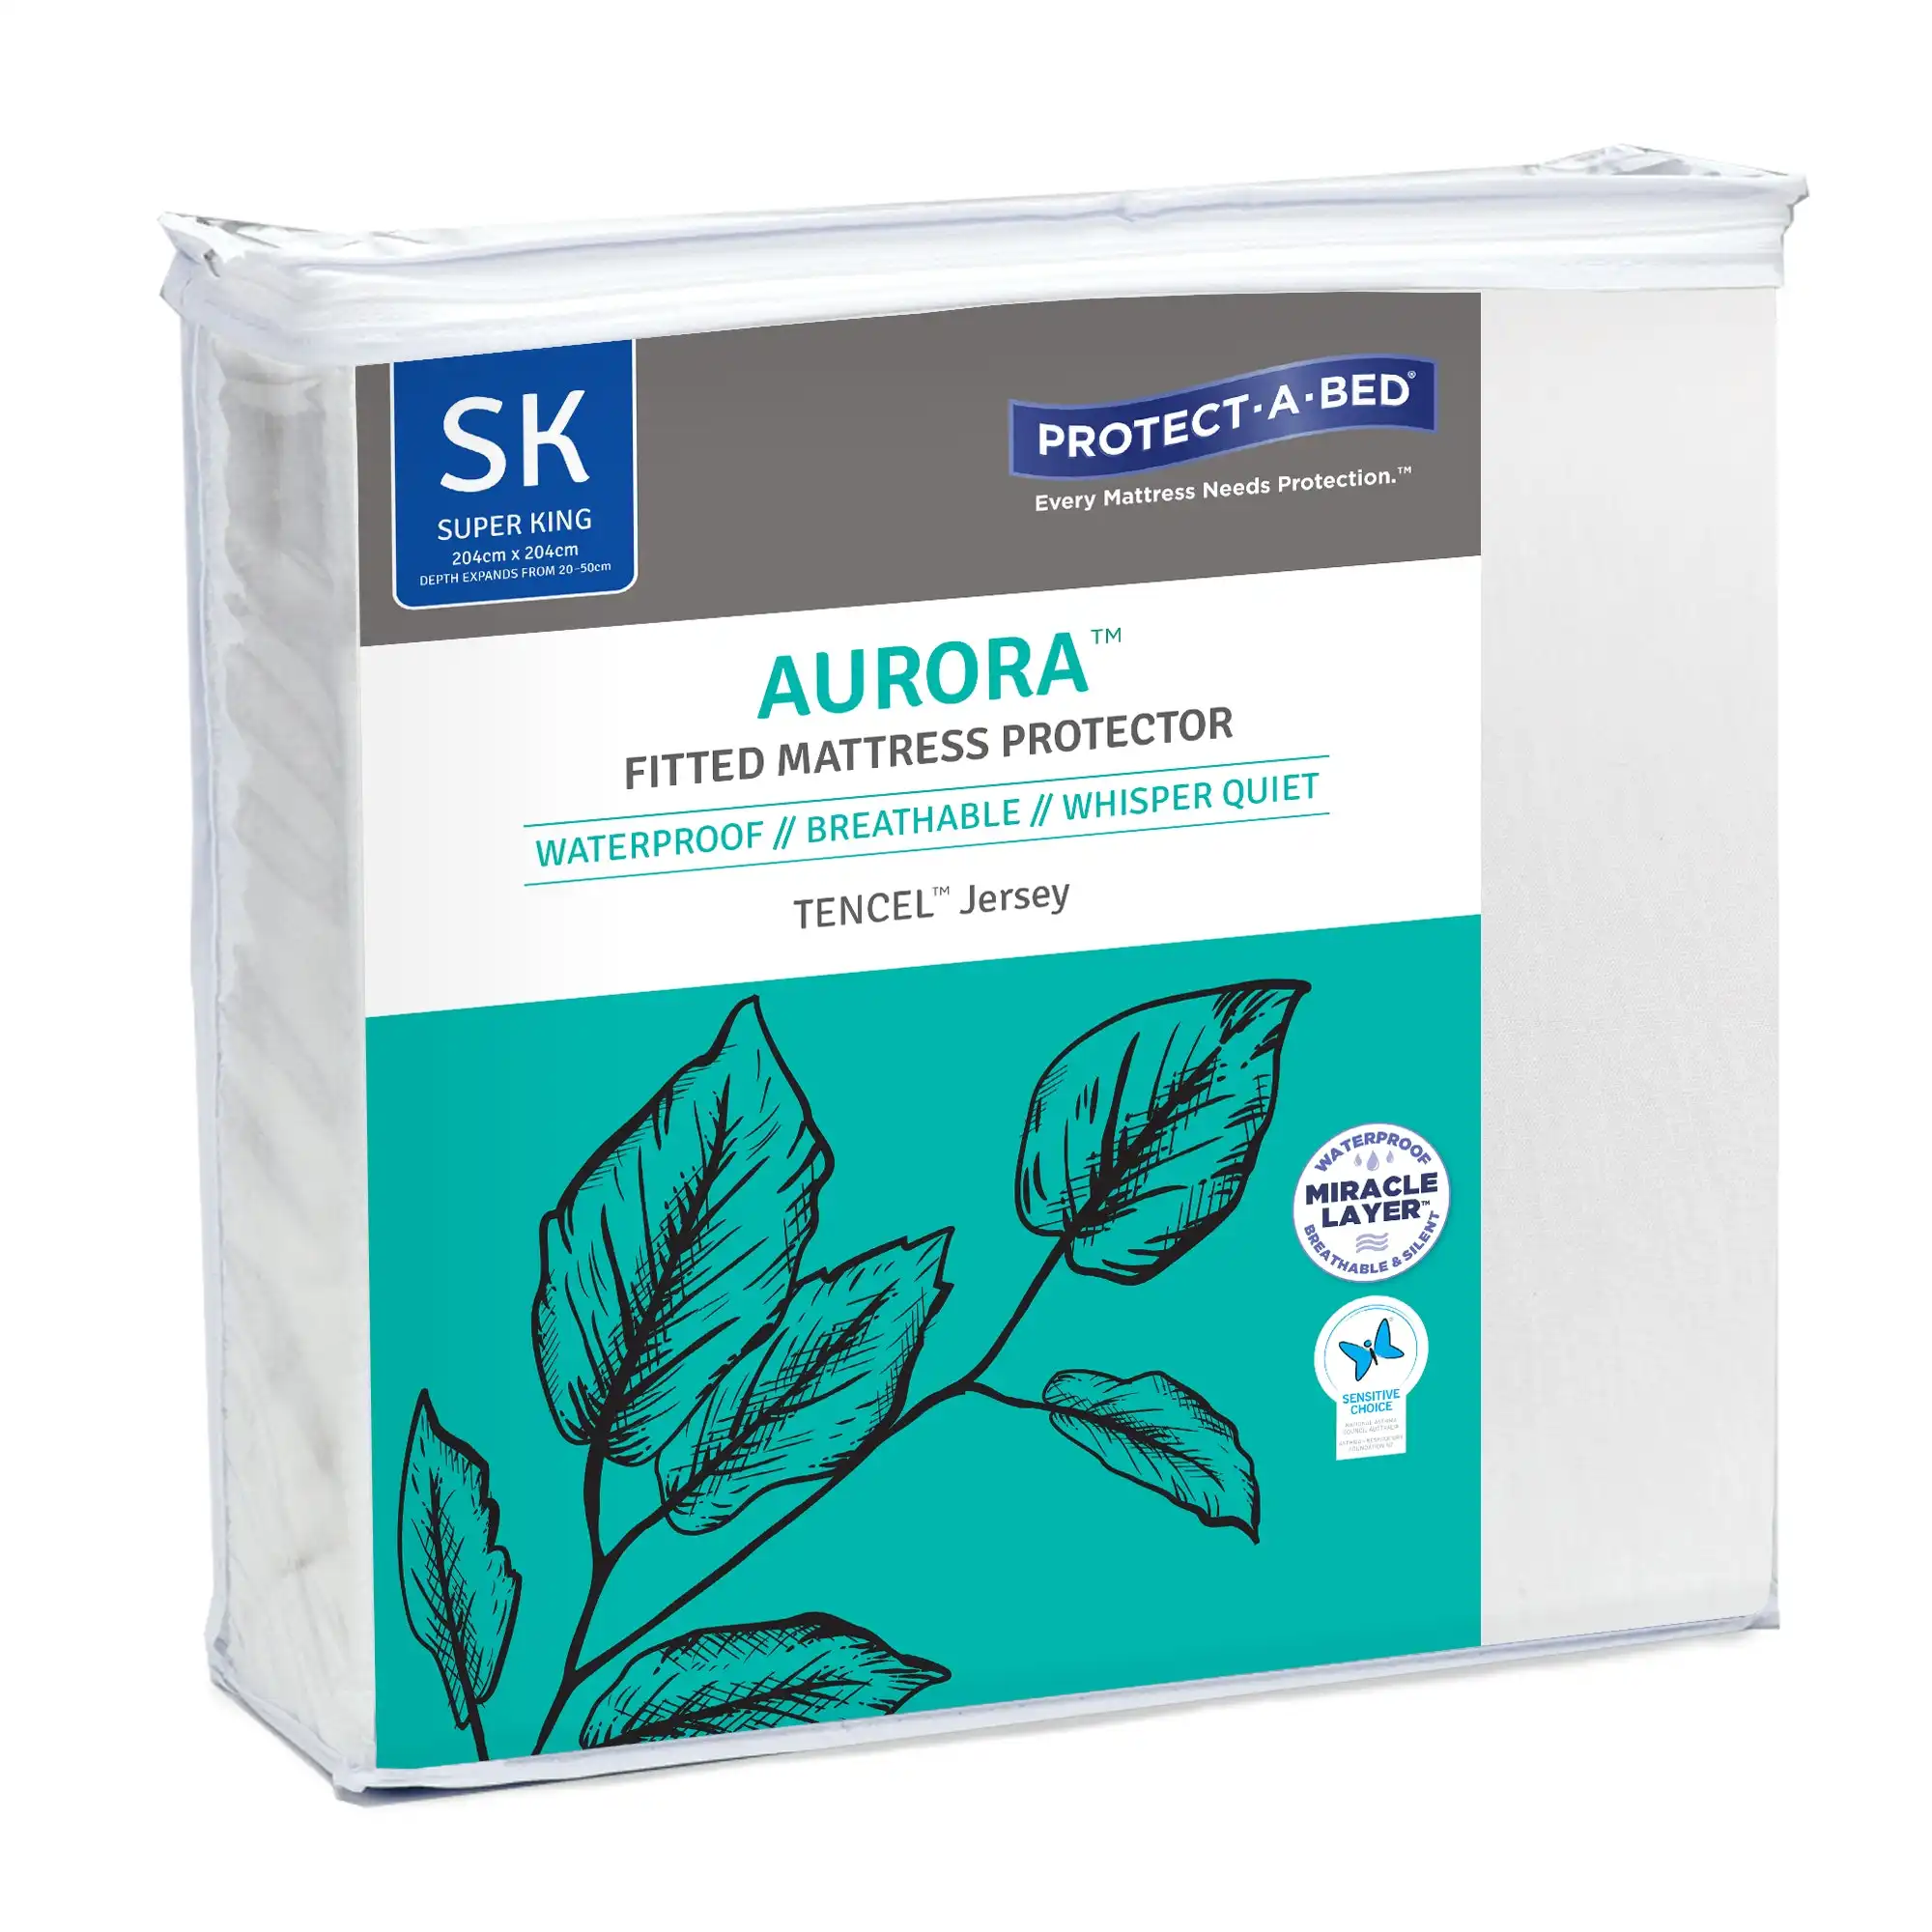 Protect A Bed Aurora Tencel Jersey Fitted Waterproof Mattress & Pillow Protectors ON SALE